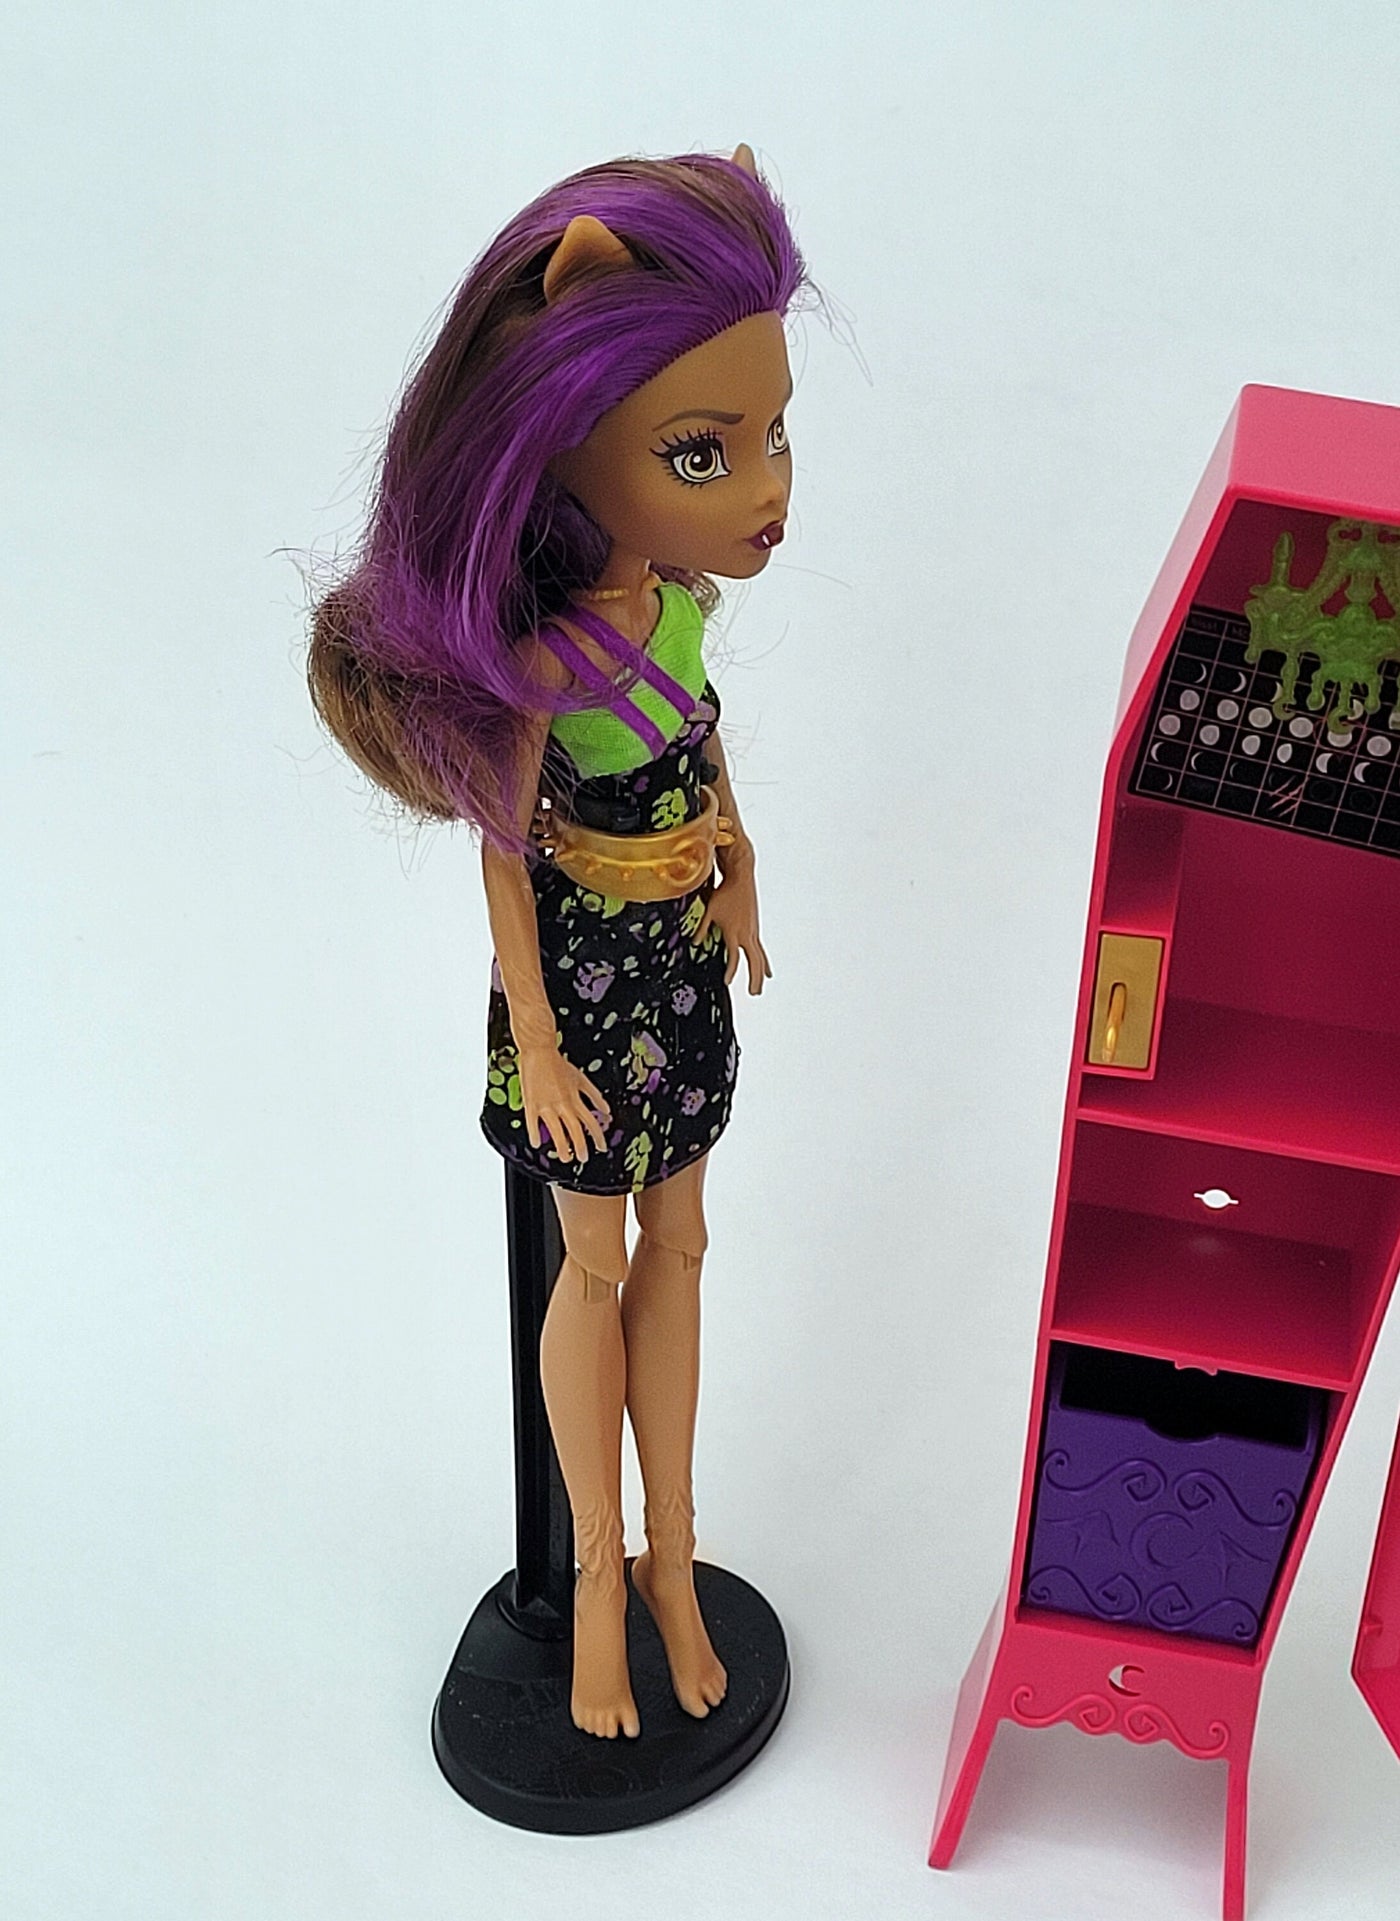 Monster High Doll and Fashion Playset Clawdeen Wolf Doll and